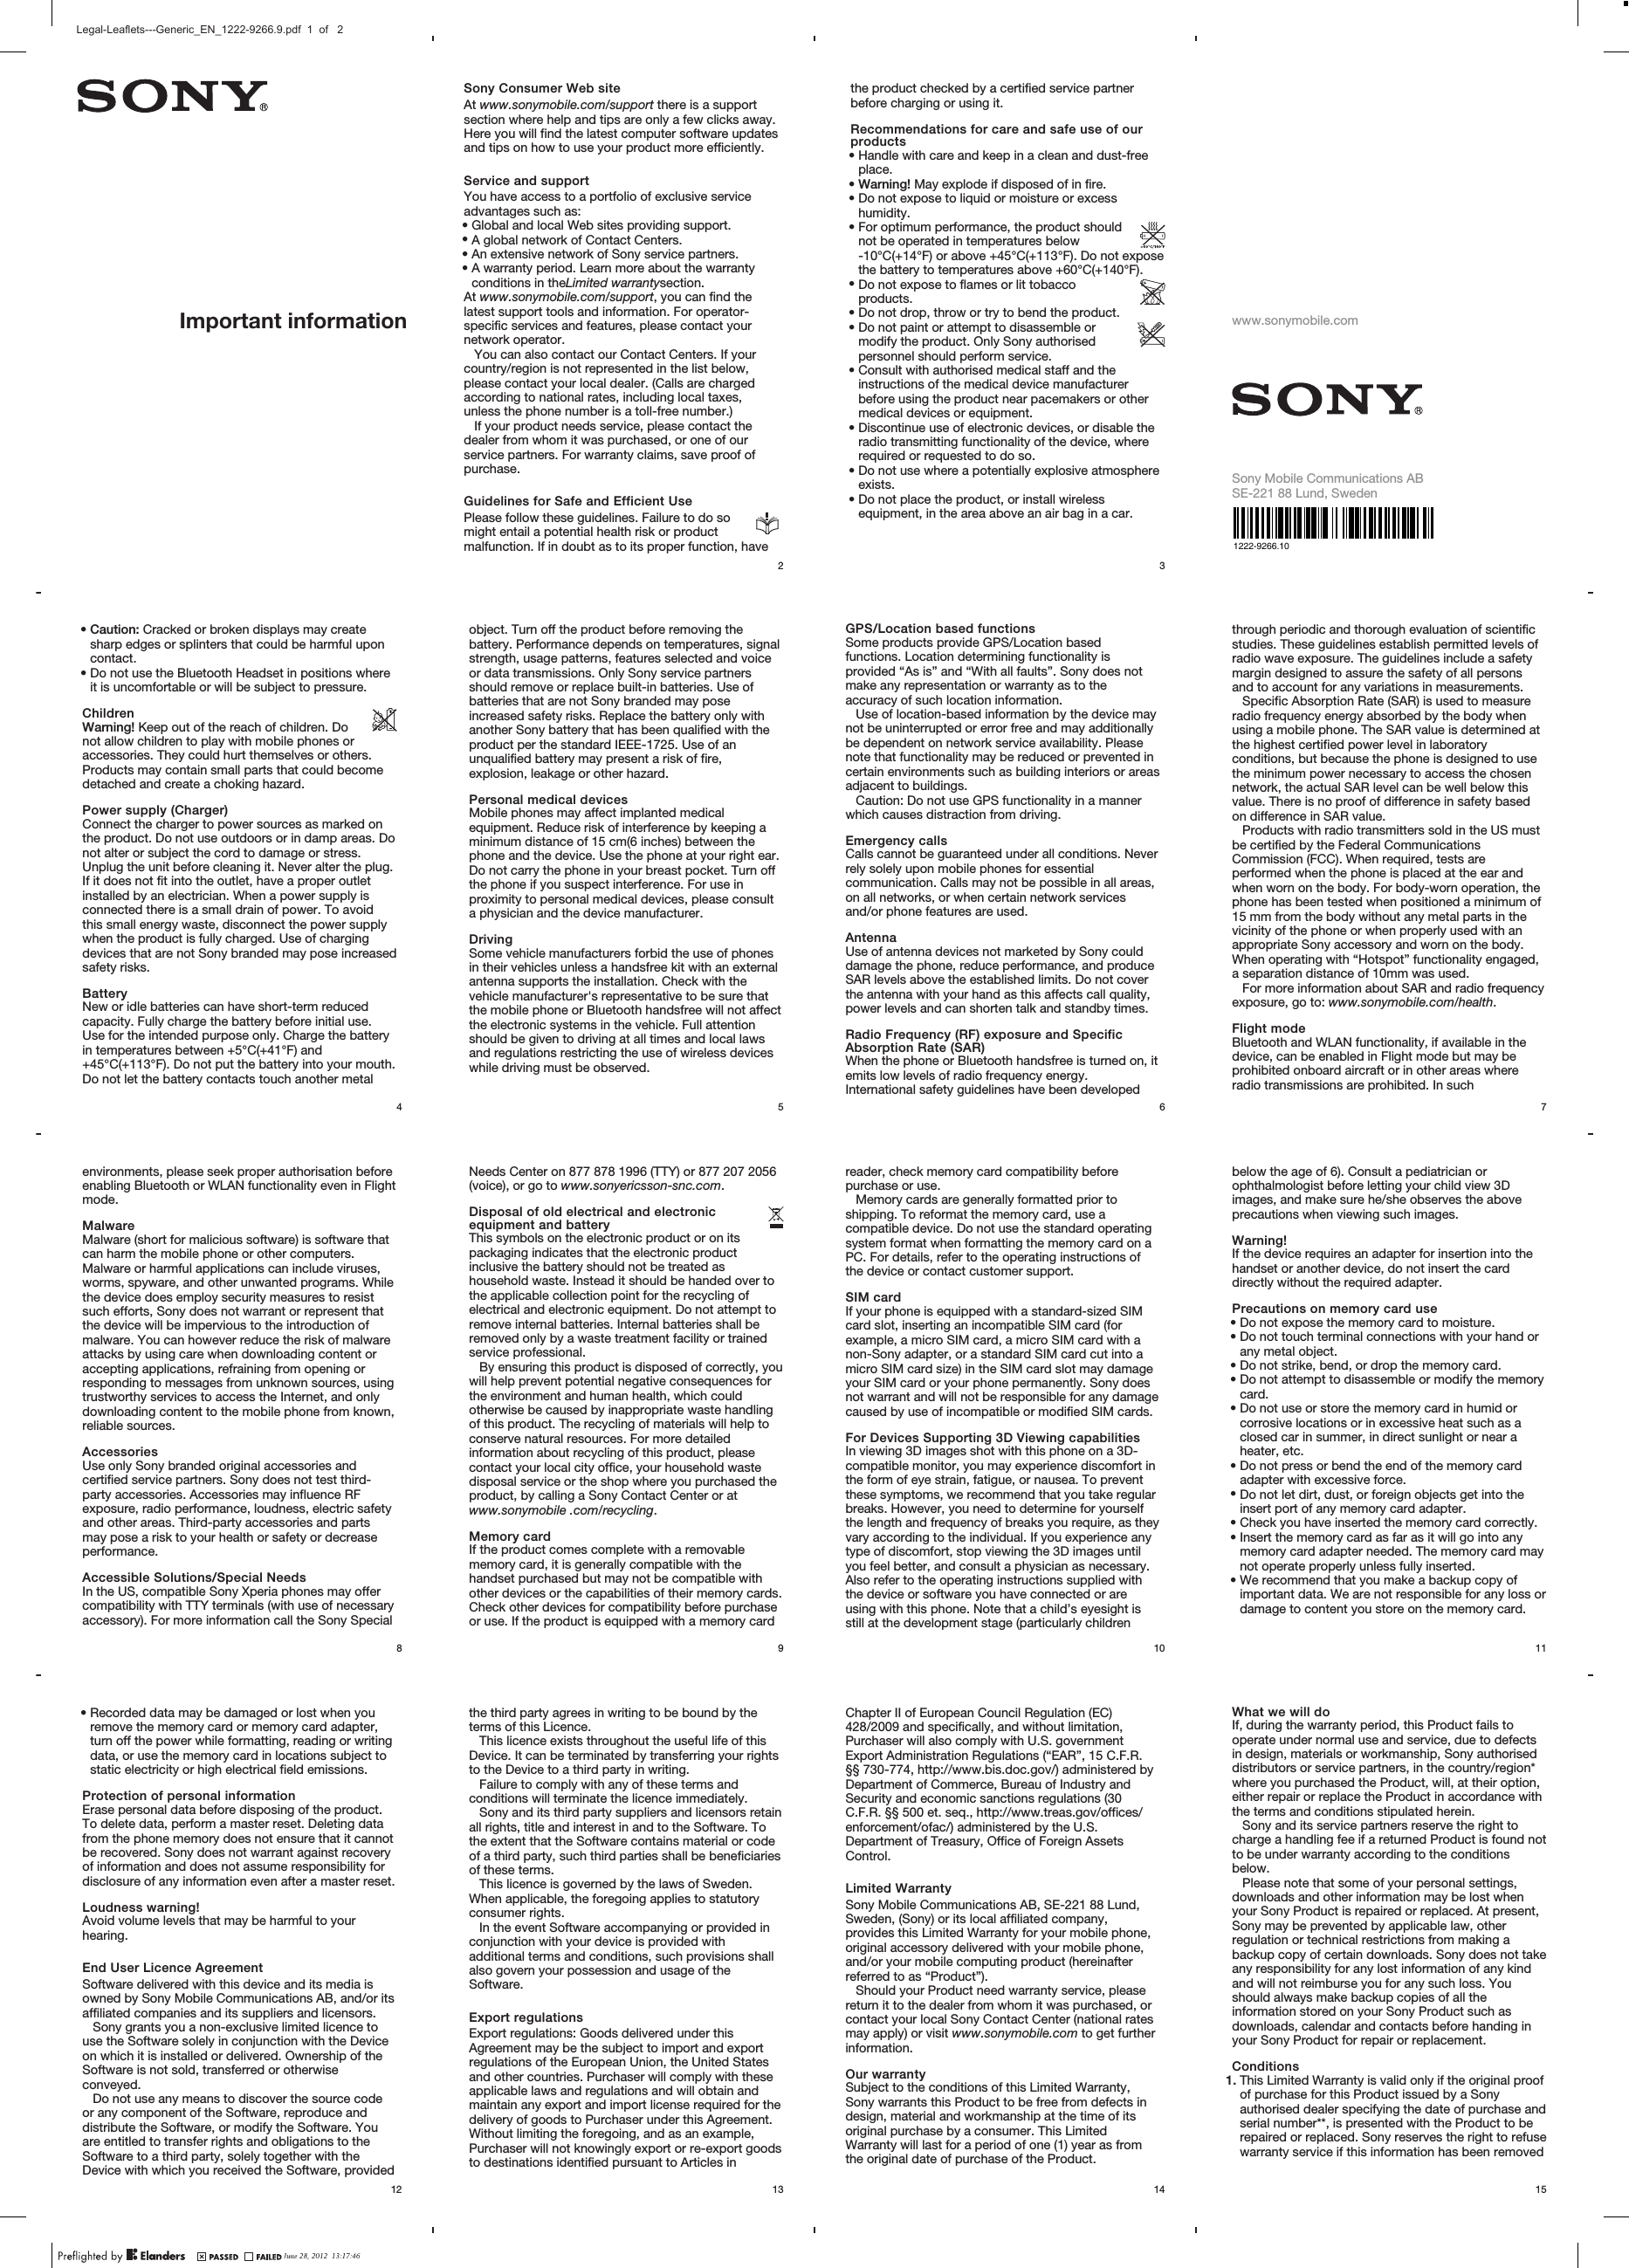 Important informationSony Consumer Web siteAt www.sonymobile.com/support there is a supportsection where help and tips are only a few clicks away.Here you will find the latest computer software updatesand tips on how to use your product more efficiently.Service and supportYou have access to a portfolio of exclusive serviceadvantages such as:•Global and local Web sites providing support.•A global network of Contact Centers.•An extensive network of Sony service partners.•A warranty period. Learn more about the warrantyconditions in theLimited warrantysection.At www.sonymobile.com/support, you can find thelatest support tools and information. For operator-specific services and features, please contact yournetwork operator.You can also contact our Contact Centers. If yourcountry/region is not represented in the list below,please contact your local dealer. (Calls are chargedaccording to national rates, including local taxes,unless the phone number is a toll-free number.)If your product needs service, please contact thedealer from whom it was purchased, or one of ourservice partners. For warranty claims, save proof ofpurchase.Guidelines for Safe and Efficient UsePlease follow these guidelines. Failure to do somight entail a potential health risk or productmalfunction. If in doubt as to its proper function, have2the product checked by a certified service partnerbefore charging or using it.Recommendations for care and safe use of ourproducts•Handle with care and keep in a clean and dust-freeplace.•Warning! May explode if disposed of in fire.•Do not expose to liquid or moisture or excesshumidity.•For optimum performance, the product shouldnot be operated in temperatures below-10°C(+14°F) or above +45°C(+113°F). Do not exposethe battery to temperatures above +60°C(+140°F).•Do not expose to flames or lit tobaccoproducts.•Do not drop, throw or try to bend the product.•Do not paint or attempt to disassemble ormodify the product. Only Sony authorisedpersonnel should perform service.•Consult with authorised medical staff and theinstructions of the medical device manufacturerbefore using the product near pacemakers or othermedical devices or equipment.•Discontinue use of electronic devices, or disable theradio transmitting functionality of the device, whererequired or requested to do so.•Do not use where a potentially explosive atmosphereexists.•Do not place the product, or install wirelessequipment, in the area above an air bag in a car.3www.sonymobile.comSony Mobile Communications ABSE-221 88 Lund, Sweden•Caution: Cracked or broken displays may createsharp edges or splinters that could be harmful uponcontact.•Do not use the Bluetooth Headset in positions whereit is uncomfortable or will be subject to pressure.ChildrenWarning! Keep out of the reach of children. Donot allow children to play with mobile phones oraccessories. They could hurt themselves or others.Products may contain small parts that could becomedetached and create a choking hazard.Power supply (Charger)Connect the charger to power sources as marked onthe product. Do not use outdoors or in damp areas. Donot alter or subject the cord to damage or stress.Unplug the unit before cleaning it. Never alter the plug.If it does not fit into the outlet, have a proper outletinstalled by an electrician. When a power supply isconnected there is a small drain of power. To avoidthis small energy waste, disconnect the power supplywhen the product is fully charged. Use of chargingdevices that are not Sony branded may pose increasedsafety risks.BatteryNew or idle batteries can have short-term reducedcapacity. Fully charge the battery before initial use.Use for the intended purpose only. Charge the batteryin temperatures between +5°C(+41°F) and+45°C(+113°F). Do not put the battery into your mouth.Do not let the battery contacts touch another metal4object. Turn off the product before removing thebattery. Performance depends on temperatures, signalstrength, usage patterns, features selected and voiceor data transmissions. Only Sony service partnersshould remove or replace built-in batteries. Use ofbatteries that are not Sony branded may poseincreased safety risks. Replace the battery only withanother Sony battery that has been qualified with theproduct per the standard IEEE-1725. Use of anunqualified battery may present a risk of fire,explosion, leakage or other hazard.Personal medical devicesMobile phones may affect implanted medicalequipment. Reduce risk of interference by keeping aminimum distance of 15 cm(6 inches) between thephone and the device. Use the phone at your right ear.Do not carry the phone in your breast pocket. Turn offthe phone if you suspect interference. For use inproximity to personal medical devices, please consulta physician and the device manufacturer.DrivingSome vehicle manufacturers forbid the use of phonesin their vehicles unless a handsfree kit with an externalantenna supports the installation. Check with thevehicle manufacturer&apos;s representative to be sure thatthe mobile phone or Bluetooth handsfree will not affectthe electronic systems in the vehicle. Full attentionshould be given to driving at all times and local lawsand regulations restricting the use of wireless deviceswhile driving must be observed.5GPS/Location based functionsSome products provide GPS/Location basedfunctions. Location determining functionality isprovided “As is” and “With all faults”. Sony does notmake any representation or warranty as to theaccuracy of such location information.Use of location-based information by the device maynot be uninterrupted or error free and may additionallybe dependent on network service availability. Pleasenote that functionality may be reduced or prevented incertain environments such as building interiors or areasadjacent to buildings.Caution: Do not use GPS functionality in a mannerwhich causes distraction from driving.Emergency callsCalls cannot be guaranteed under all conditions. Neverrely solely upon mobile phones for essentialcommunication. Calls may not be possible in all areas,on all networks, or when certain network servicesand/or phone features are used.AntennaUse of antenna devices not marketed by Sony coulddamage the phone, reduce performance, and produceSAR levels above the established limits. Do not coverthe antenna with your hand as this affects call quality,power levels and can shorten talk and standby times.Radio Frequency (RF) exposure and SpecificAbsorption Rate (SAR)When the phone or Bluetooth handsfree is turned on, itemits low levels of radio frequency energy.International safety guidelines have been developed6through periodic and thorough evaluation of scientificstudies. These guidelines establish permitted levels ofradio wave exposure. The guidelines include a safetymargin designed to assure the safety of all personsand to account for any variations in measurements.Specific Absorption Rate (SAR) is used to measureradio frequency energy absorbed by the body whenusing a mobile phone. The SAR value is determined atthe highest certified power level in laboratoryconditions, but because the phone is designed to usethe minimum power necessary to access the chosennetwork, the actual SAR level can be well below thisvalue. There is no proof of difference in safety basedon difference in SAR value.Products with radio transmitters sold in the US mustbe certified by the Federal CommunicationsCommission (FCC). When required, tests areperformed when the phone is placed at the ear andwhen worn on the body. For body-worn operation, thephone has been tested when positioned a minimum of15 mm from the body without any metal parts in thevicinity of the phone or when properly used with anappropriate Sony accessory and worn on the body.When operating with “Hotspot” functionality engaged,a separation distance of 10mm was used.For more information about SAR and radio frequencyexposure, go to: www.sonymobile.com/health.Flight modeBluetooth and WLAN functionality, if available in thedevice, can be enabled in Flight mode but may beprohibited onboard aircraft or in other areas whereradio transmissions are prohibited. In such7environments, please seek proper authorisation beforeenabling Bluetooth or WLAN functionality even in Flightmode.MalwareMalware (short for malicious software) is software thatcan harm the mobile phone or other computers.Malware or harmful applications can include viruses,worms, spyware, and other unwanted programs. Whilethe device does employ security measures to resistsuch efforts, Sony does not warrant or represent thatthe device will be impervious to the introduction ofmalware. You can however reduce the risk of malwareattacks by using care when downloading content oraccepting applications, refraining from opening orresponding to messages from unknown sources, usingtrustworthy services to access the Internet, and onlydownloading content to the mobile phone from known,reliable sources.AccessoriesUse only Sony branded original accessories andcertified service partners. Sony does not test third-party accessories. Accessories may influence RFexposure, radio performance, loudness, electric safetyand other areas. Third-party accessories and partsmay pose a risk to your health or safety or decreaseperformance.Accessible Solutions/Special NeedsIn the US, compatible Sony Xperia phones may offercompatibility with TTY terminals (with use of necessaryaccessory). For more information call the Sony Special8Needs Center on 877 878 1996 (TTY) or 877 207 2056(voice), or go to www.sonyericsson-snc.com.Disposal of old electrical and electronicequipment and batteryThis symbols on the electronic product or on itspackaging indicates that the electronic productinclusive the battery should not be treated ashousehold waste. Instead it should be handed over tothe applicable collection point for the recycling ofelectrical and electronic equipment. Do not attempt toremove internal batteries. Internal batteries shall beremoved only by a waste treatment facility or trainedservice professional.By ensuring this product is disposed of correctly, youwill help prevent potential negative consequences forthe environment and human health, which couldotherwise be caused by inappropriate waste handlingof this product. The recycling of materials will help toconserve natural resources. For more detailedinformation about recycling of this product, pleasecontact your local city office, your household wastedisposal service or the shop where you purchased theproduct, by calling a Sony Contact Center or atwww.sonymobile .com/recycling.Memory cardIf the product comes complete with a removablememory card, it is generally compatible with thehandset purchased but may not be compatible withother devices or the capabilities of their memory cards.Check other devices for compatibility before purchaseor use. If the product is equipped with a memory card9reader, check memory card compatibility beforepurchase or use.Memory cards are generally formatted prior toshipping. To reformat the memory card, use acompatible device. Do not use the standard operatingsystem format when formatting the memory card on aPC. For details, refer to the operating instructions ofthe device or contact customer support.SIM cardIf your phone is equipped with a standard-sized SIMcard slot, inserting an incompatible SIM card (forexample, a micro SIM card, a micro SIM card with anon-Sony adapter, or a standard SIM card cut into amicro SIM card size) in the SIM card slot may damageyour SIM card or your phone permanently. Sony doesnot warrant and will not be responsible for any damagecaused by use of incompatible or modified SIM cards.For Devices Supporting 3D Viewing capabilitiesIn viewing 3D images shot with this phone on a 3D-compatible monitor, you may experience discomfort inthe form of eye strain, fatigue, or nausea. To preventthese symptoms, we recommend that you take regularbreaks. However, you need to determine for yourselfthe length and frequency of breaks you require, as theyvary according to the individual. If you experience anytype of discomfort, stop viewing the 3D images untilyou feel better, and consult a physician as necessary.Also refer to the operating instructions supplied withthe device or software you have connected or areusing with this phone. Note that a child’s eyesight isstill at the development stage (particularly children10below the age of 6). Consult a pediatrician orophthalmologist before letting your child view 3Dimages, and make sure he/she observes the aboveprecautions when viewing such images.Warning!If the device requires an adapter for insertion into thehandset or another device, do not insert the carddirectly without the required adapter.Precautions on memory card use•Do not expose the memory card to moisture.•Do not touch terminal connections with your hand orany metal object.•Do not strike, bend, or drop the memory card.•Do not attempt to disassemble or modify the memorycard.•Do not use or store the memory card in humid orcorrosive locations or in excessive heat such as aclosed car in summer, in direct sunlight or near aheater, etc.•Do not press or bend the end of the memory cardadapter with excessive force.•Do not let dirt, dust, or foreign objects get into theinsert port of any memory card adapter.•Check you have inserted the memory card correctly.•Insert the memory card as far as it will go into anymemory card adapter needed. The memory card maynot operate properly unless fully inserted.•We recommend that you make a backup copy ofimportant data. We are not responsible for any loss ordamage to content you store on the memory card.11•Recorded data may be damaged or lost when youremove the memory card or memory card adapter,turn off the power while formatting, reading or writingdata, or use the memory card in locations subject tostatic electricity or high electrical field emissions.Protection of personal informationErase personal data before disposing of the product.To delete data, perform a master reset. Deleting datafrom the phone memory does not ensure that it cannotbe recovered. Sony does not warrant against recoveryof information and does not assume responsibility fordisclosure of any information even after a master reset.Loudness warning!Avoid volume levels that may be harmful to yourhearing.End User Licence AgreementSoftware delivered with this device and its media isowned by Sony Mobile Communications AB, and/or itsaffiliated companies and its suppliers and licensors.Sony grants you a non-exclusive limited licence touse the Software solely in conjunction with the Deviceon which it is installed or delivered. Ownership of theSoftware is not sold, transferred or otherwiseconveyed.Do not use any means to discover the source codeor any component of the Software, reproduce anddistribute the Software, or modify the Software. Youare entitled to transfer rights and obligations to theSoftware to a third party, solely together with theDevice with which you received the Software, provided12the third party agrees in writing to be bound by theterms of this Licence.This licence exists throughout the useful life of thisDevice. It can be terminated by transferring your rightsto the Device to a third party in writing.Failure to comply with any of these terms andconditions will terminate the licence immediately.Sony and its third party suppliers and licensors retainall rights, title and interest in and to the Software. Tothe extent that the Software contains material or codeof a third party, such third parties shall be beneficiariesof these terms.This licence is governed by the laws of Sweden.When applicable, the foregoing applies to statutoryconsumer rights.In the event Software accompanying or provided inconjunction with your device is provided withadditional terms and conditions, such provisions shallalso govern your possession and usage of theSoftware.Export regulationsExport regulations: Goods delivered under thisAgreement may be the subject to import and exportregulations of the European Union, the United Statesand other countries. Purchaser will comply with theseapplicable laws and regulations and will obtain andmaintain any export and import license required for thedelivery of goods to Purchaser under this Agreement.Without limiting the foregoing, and as an example,Purchaser will not knowingly export or re-export goodsto destinations identified pursuant to Articles in13Chapter II of European Council Regulation (EC)428/2009 and specifically, and without limitation,Purchaser will also comply with U.S. governmentExport Administration Regulations (“EAR”, 15 C.F.R.§§ 730-774, http://www.bis.doc.gov/) administered byDepartment of Commerce, Bureau of Industry andSecurity and economic sanctions regulations (30C.F.R. §§ 500 et. seq., http://www.treas.gov/offices/enforcement/ofac/) administered by the U.S.Department of Treasury, Office of Foreign AssetsControl.Limited WarrantySony Mobile Communications AB, SE-221 88 Lund,Sweden, (Sony) or its local affiliated company,provides this Limited Warranty for your mobile phone,original accessory delivered with your mobile phone,and/or your mobile computing product (hereinafterreferred to as “Product”).Should your Product need warranty service, pleasereturn it to the dealer from whom it was purchased, orcontact your local Sony Contact Center (national ratesmay apply) or visit www.sonymobile.com to get furtherinformation.Our warrantySubject to the conditions of this Limited Warranty,Sony warrants this Product to be free from defects indesign, material and workmanship at the time of itsoriginal purchase by a consumer. This LimitedWarranty will last for a period of one (1) year as fromthe original date of purchase of the Product.14What we will doIf, during the warranty period, this Product fails tooperate under normal use and service, due to defectsin design, materials or workmanship, Sony authoriseddistributors or service partners, in the country/region*where you purchased the Product, will, at their option,either repair or replace the Product in accordance withthe terms and conditions stipulated herein.Sony and its service partners reserve the right tocharge a handling fee if a returned Product is found notto be under warranty according to the conditionsbelow.Please note that some of your personal settings,downloads and other information may be lost whenyour Sony Product is repaired or replaced. At present,Sony may be prevented by applicable law, otherregulation or technical restrictions from making abackup copy of certain downloads. Sony does not takeany responsibility for any lost information of any kindand will not reimburse you for any such loss. Youshould always make backup copies of all theinformation stored on your Sony Product such asdownloads, calendar and contacts before handing inyour Sony Product for repair or replacement.Conditions1. This Limited Warranty is valid only if the original proofof purchase for this Product issued by a Sonyauthorised dealer specifying the date of purchase andserial number**, is presented with the Product to berepaired or replaced. Sony reserves the right to refusewarranty service if this information has been removed15June 28, 2012  13:17:46Legal-Leaflets---Generic_EN_1222-9266.9.pdf  1  of   21222-9266.10